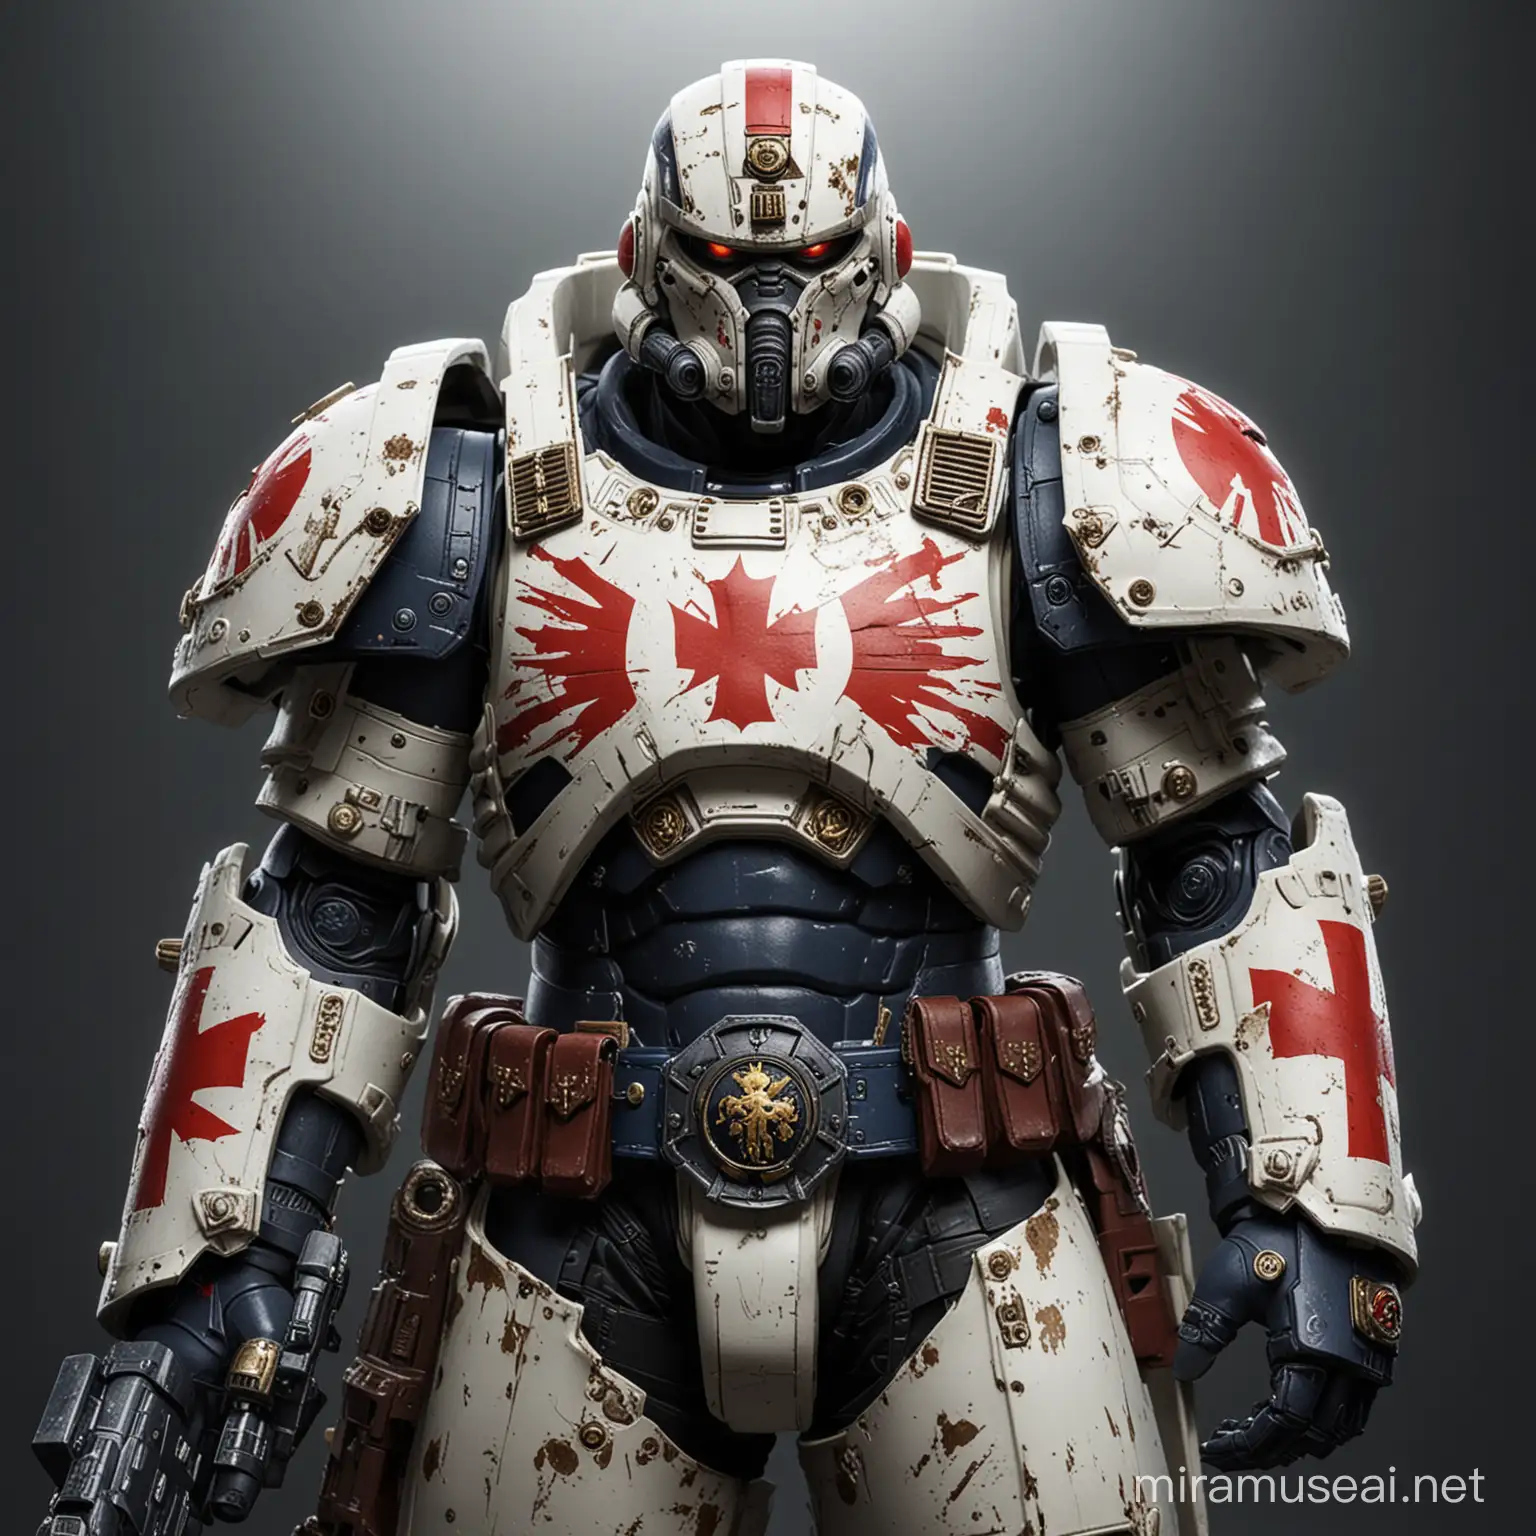 Japania Warhammer 40k Space Marine White Scars Honoring Japanese Culture in Epic SciFi Armor